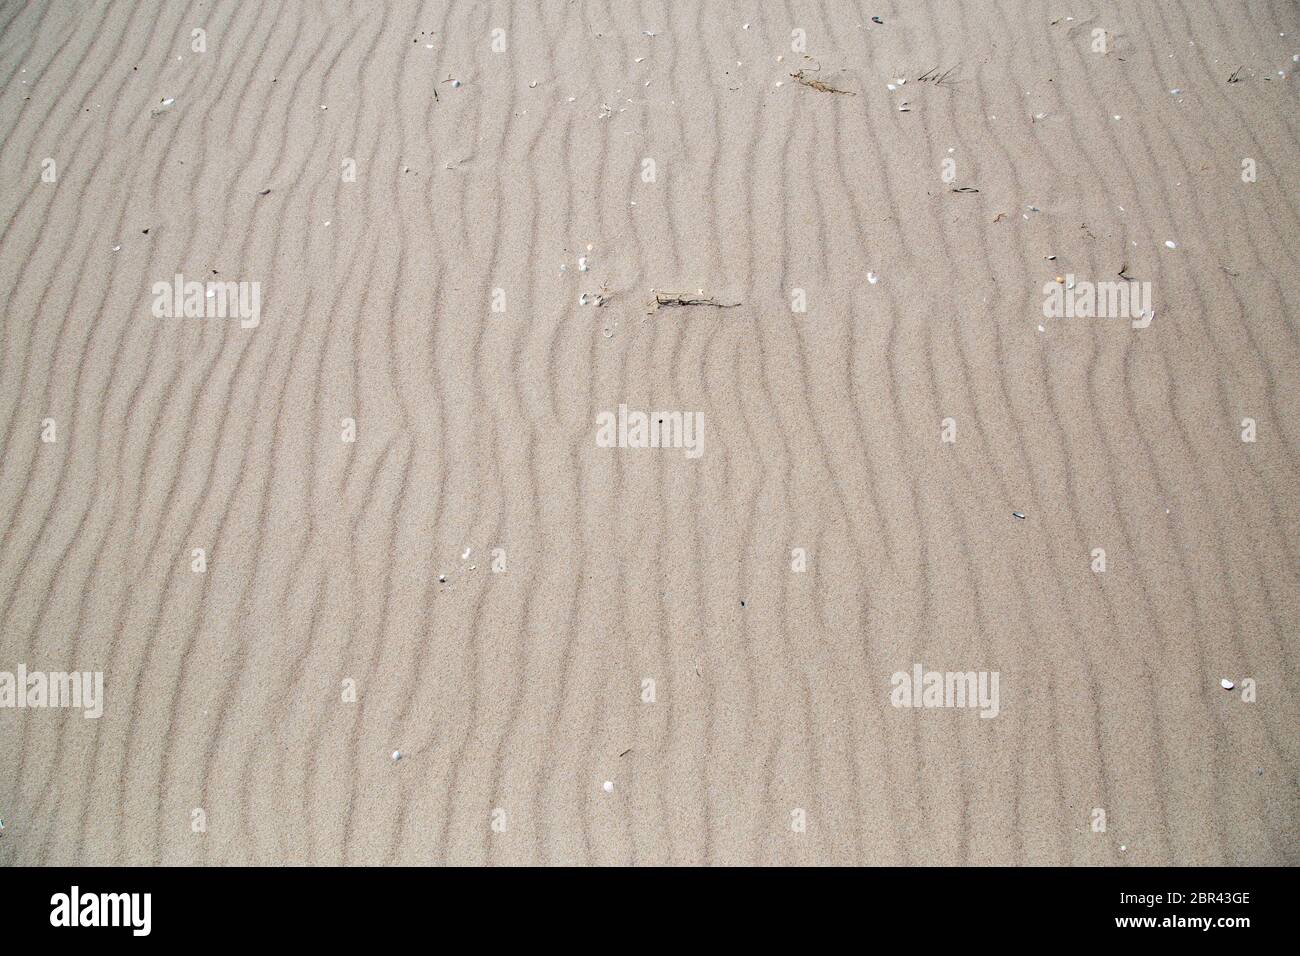 The beach of Zempin without footprints with fine, wind-generated grooves in the fine sandy beach. Stock Photo